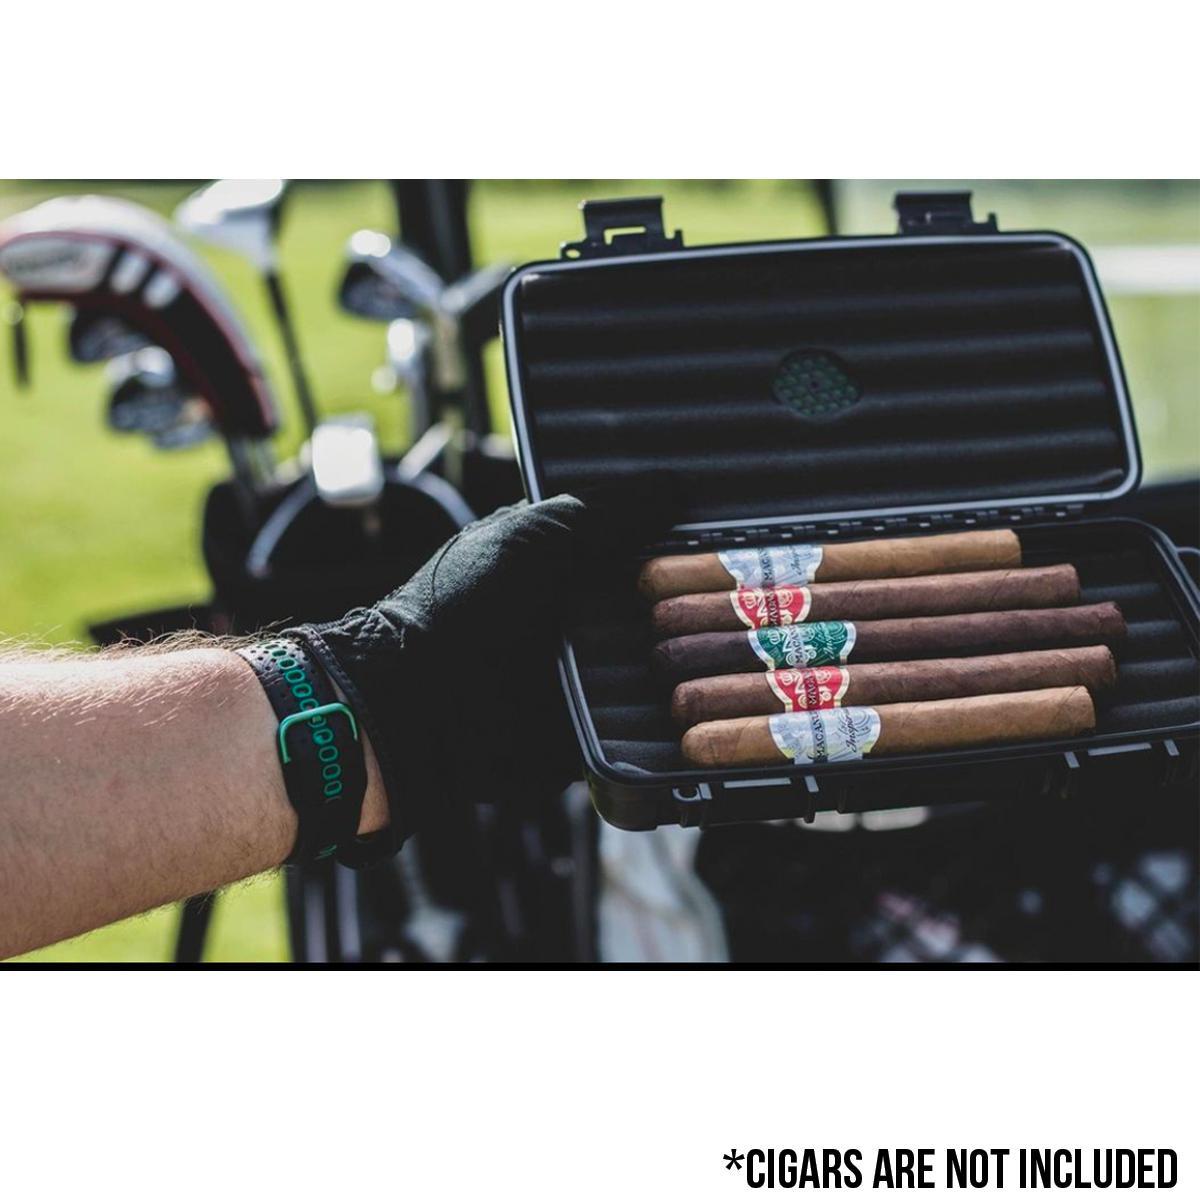 Pink Whitney Macanudo Cigar Case-Golf Accessories-Pink Whitney-One Size-Black-Barstool Sports